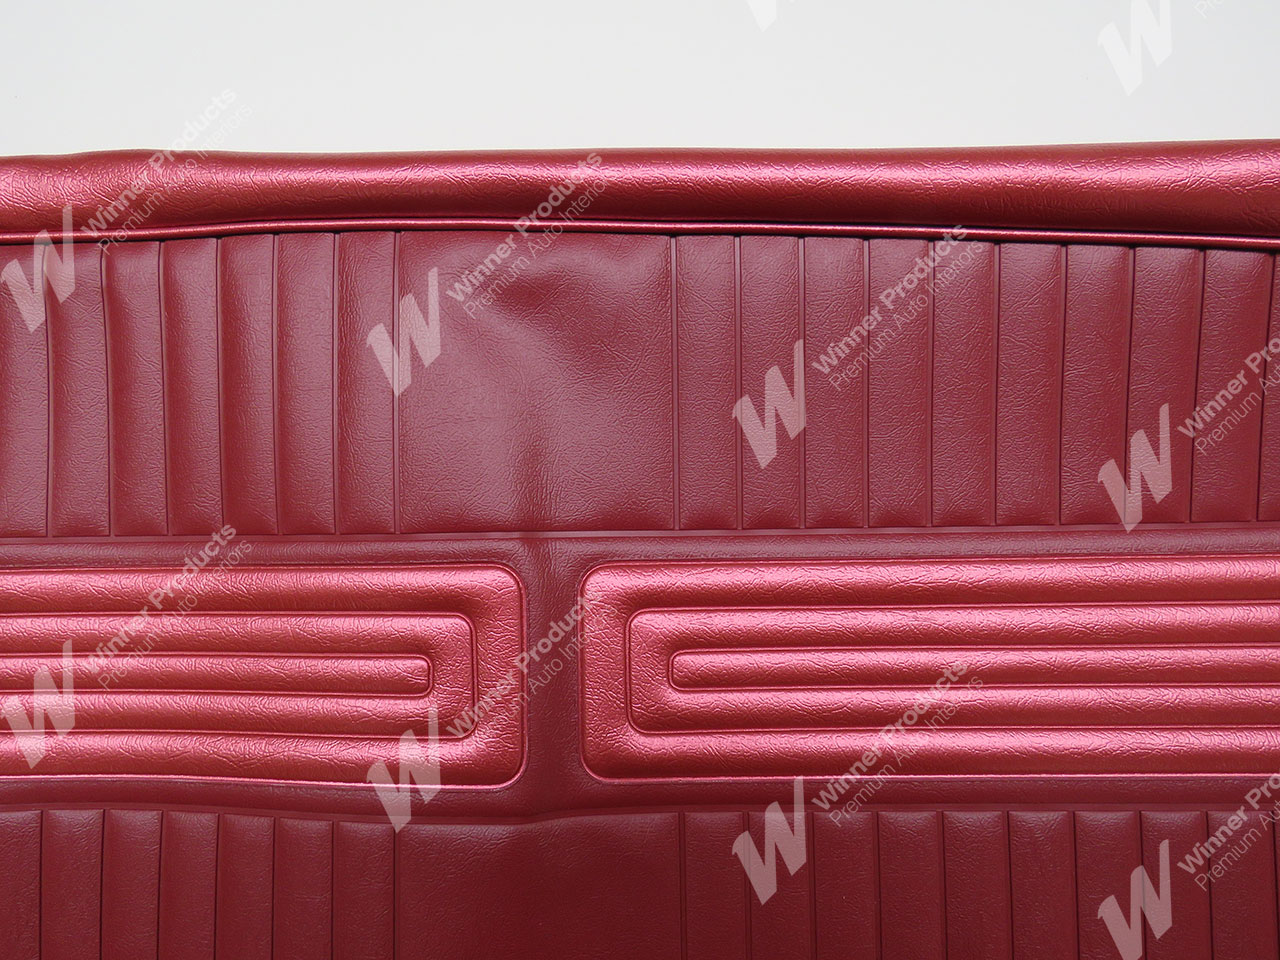 Holden Special HD Special Sedan D54 Bolero & Garnet Red Seat Covers (Image 6 of 6)